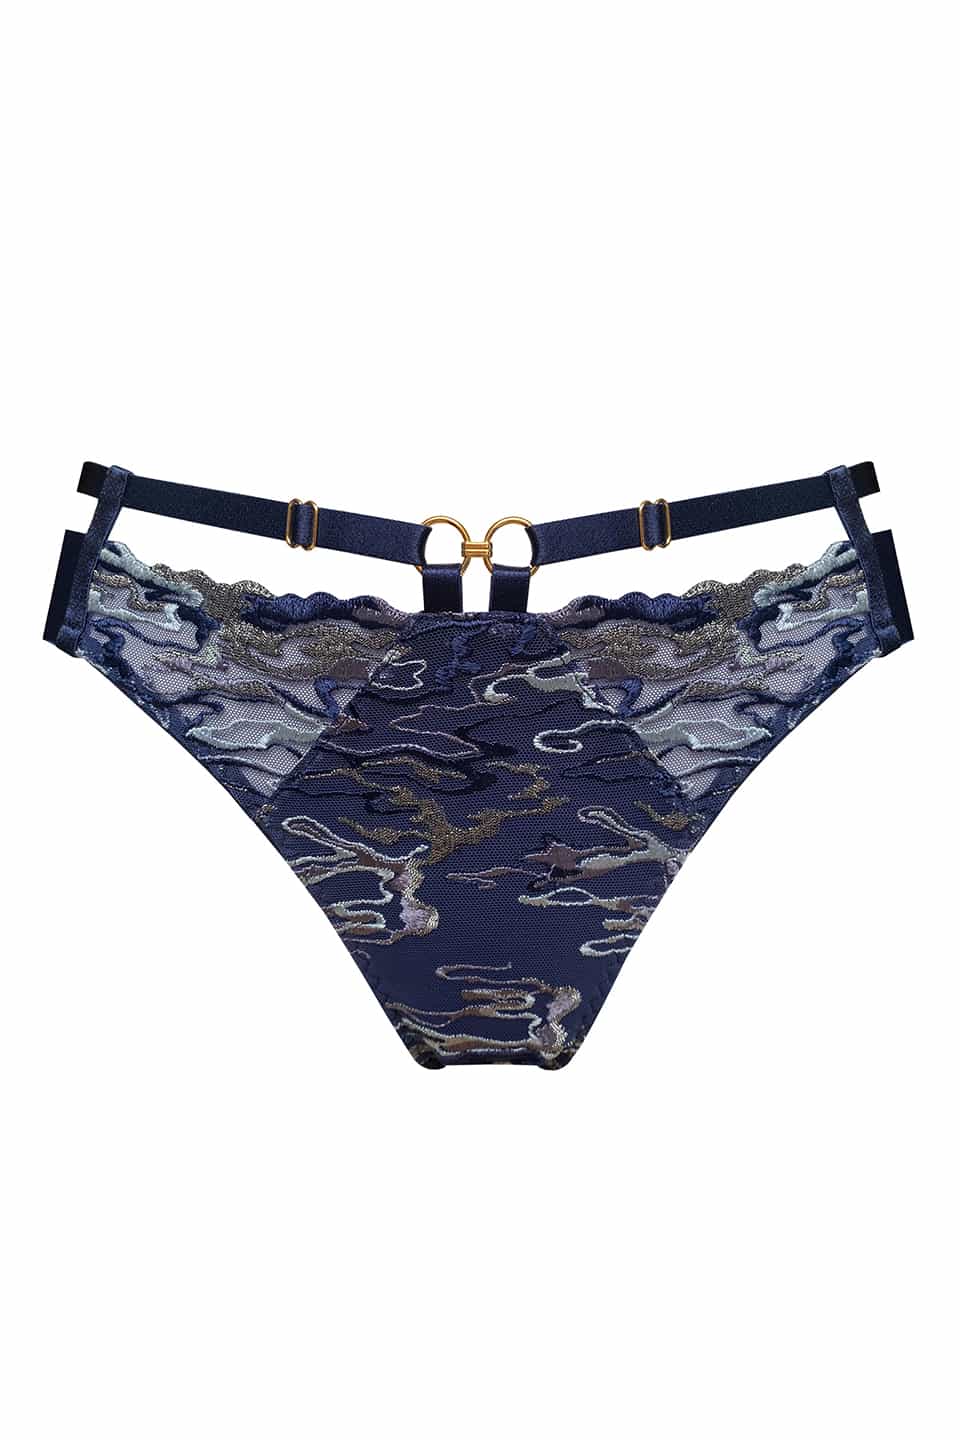 Thumbnail for Product gallery 1, Onda Brief Navy Blue